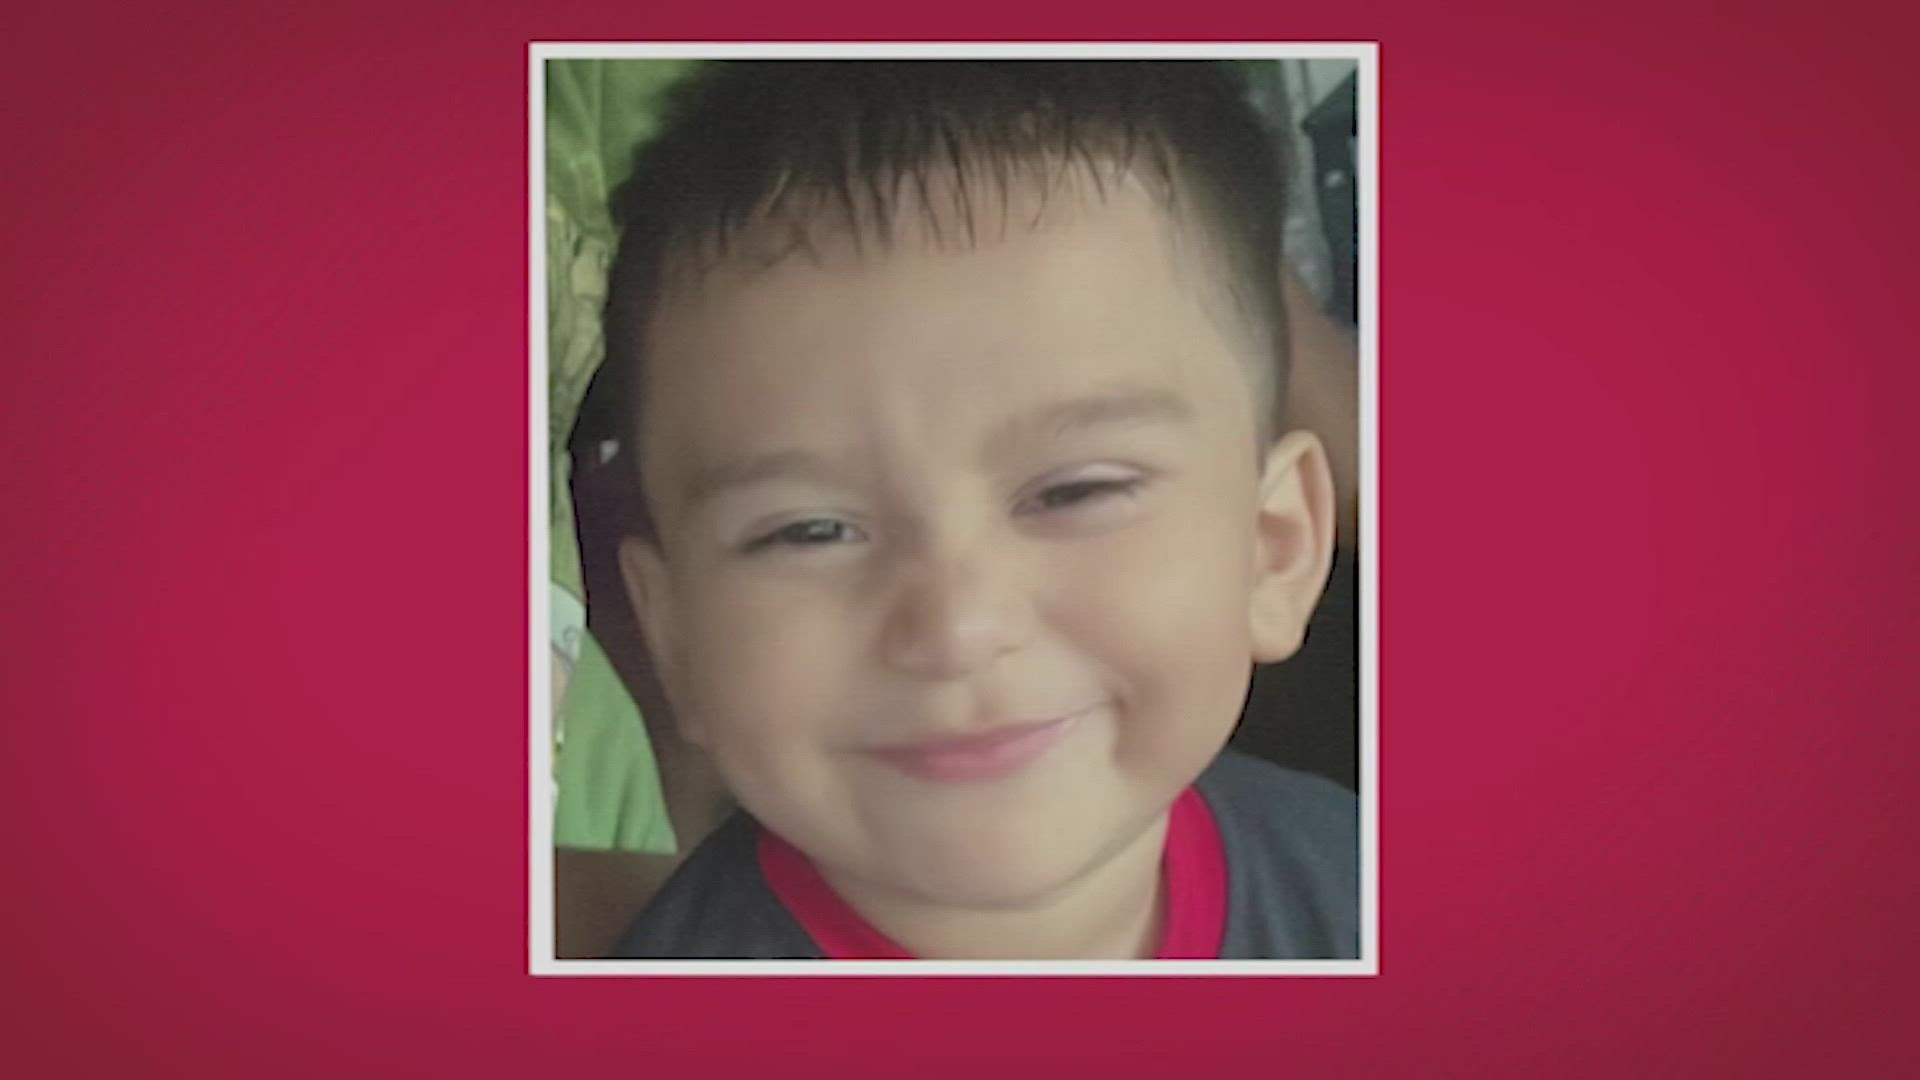 For the third night in a row, volunteers are searching for 3-year-old Christopher Ramirez, a Grimes County boy who went missing Wednesday while playing with a dog.